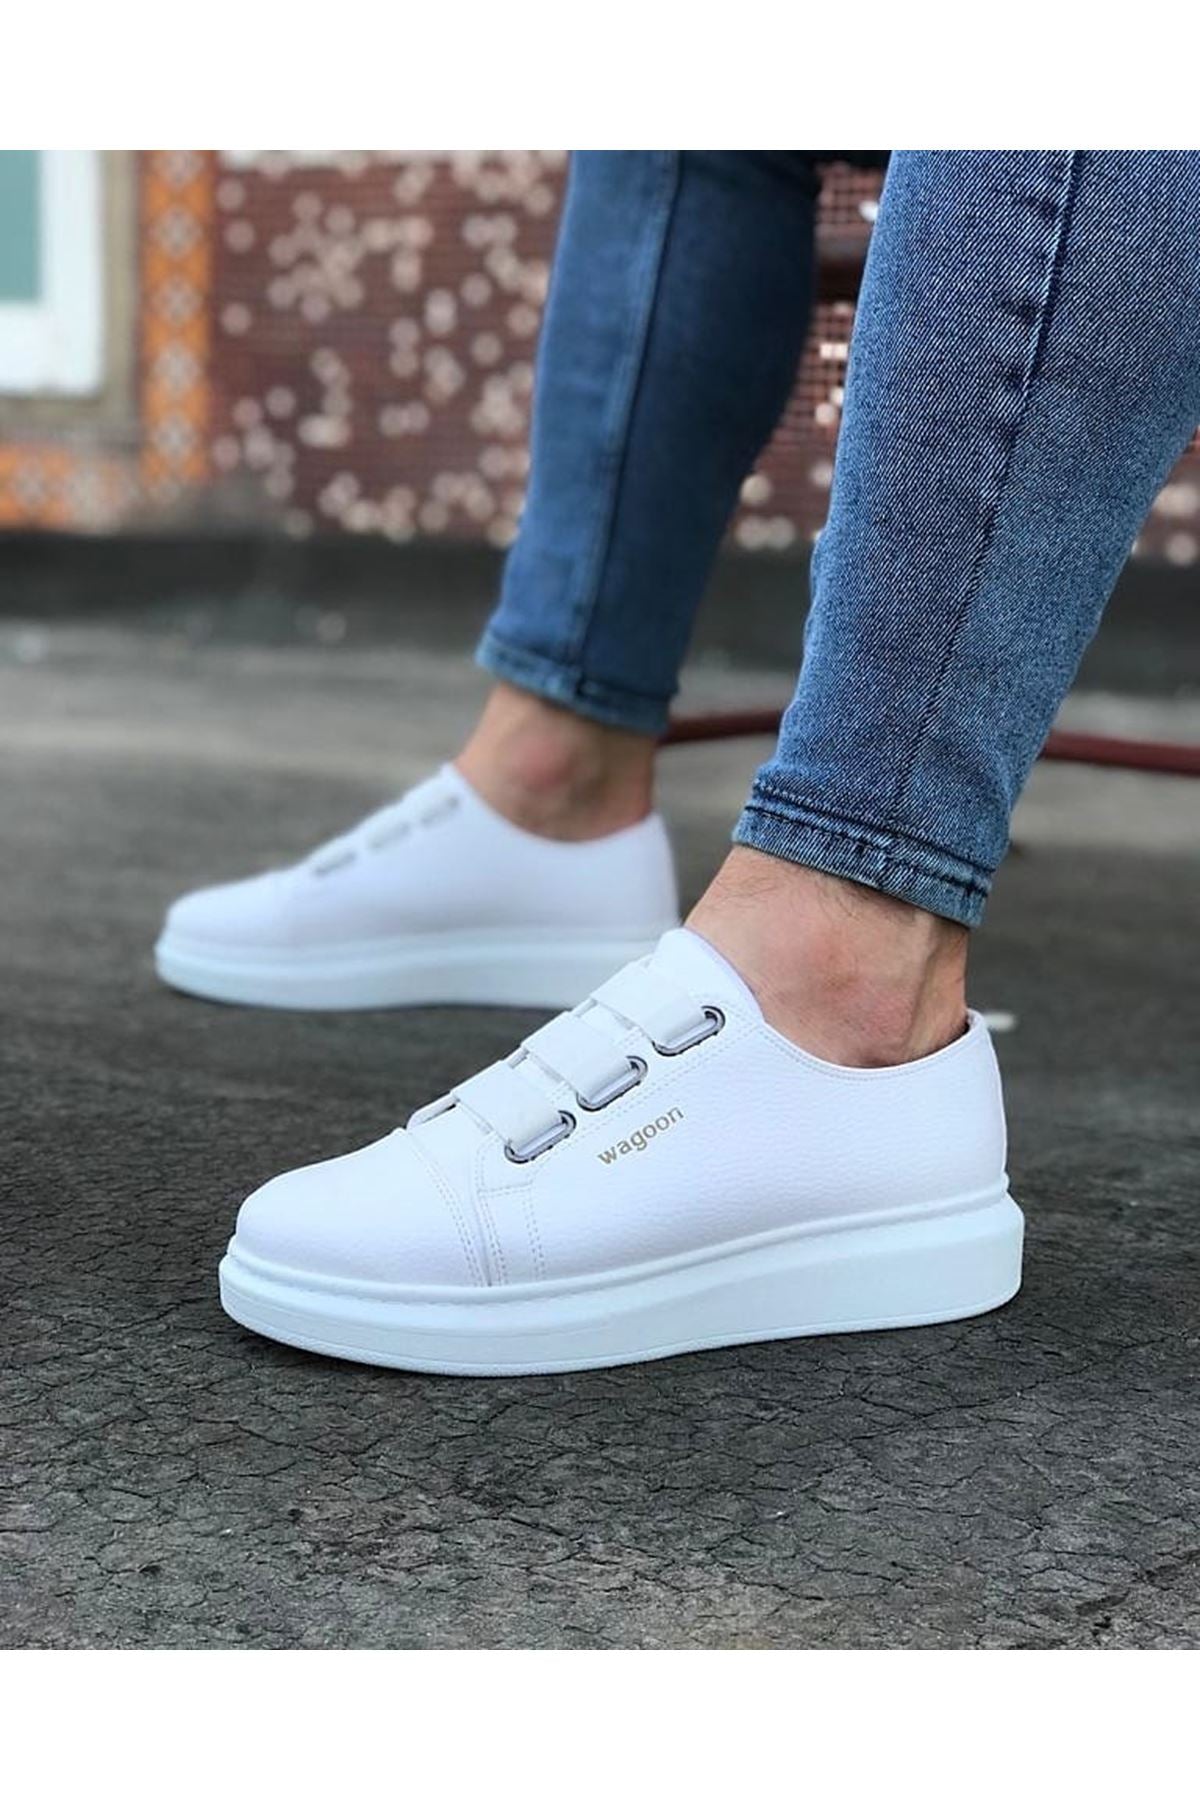 WG026 White Thick Sole Casual Men's Shoes - STREETMODE™